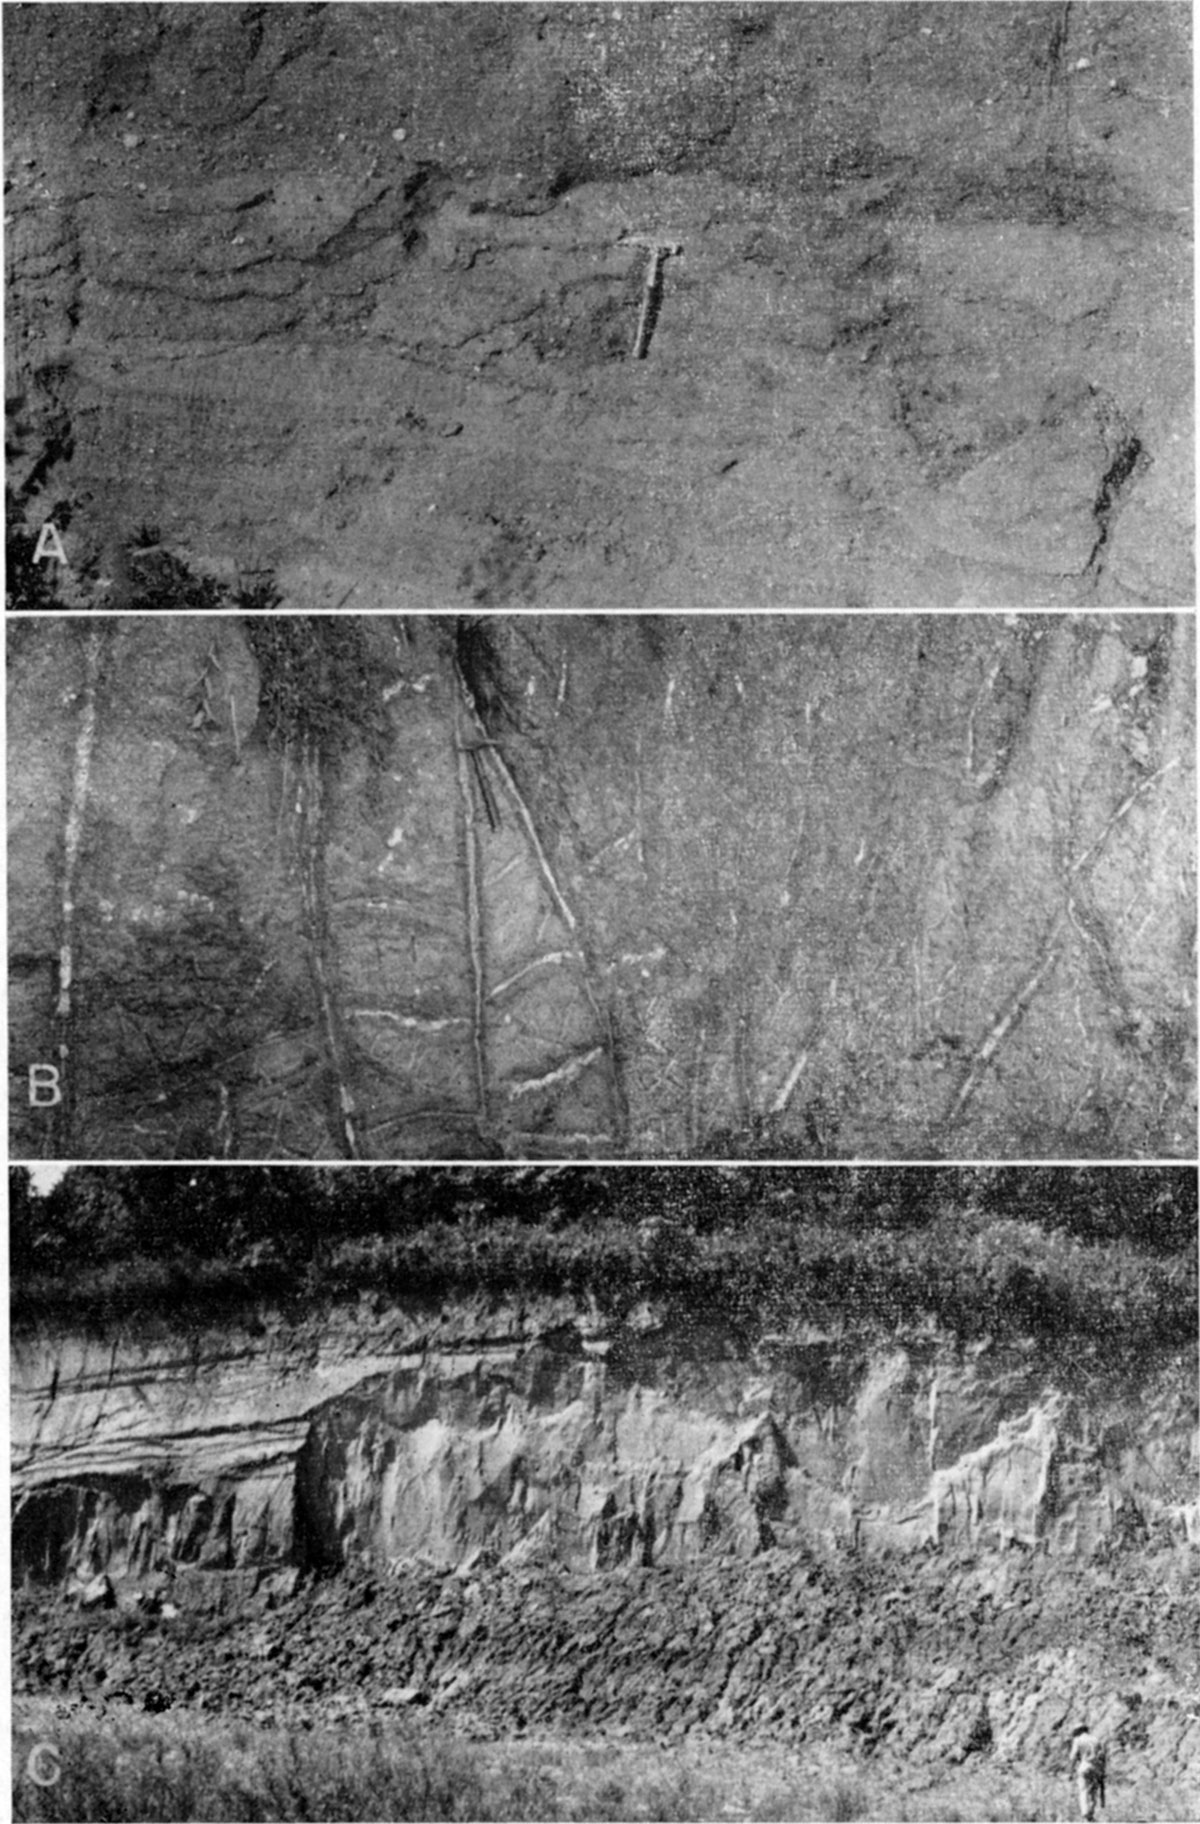 Three black and white photos; closeup of outcrop, hammer for scale, 5 feet high; closeup of outcrop, hammer for scale, 5 feet high, white filling in jopints is visible; 35-foot high outcrop, person standing near for scale